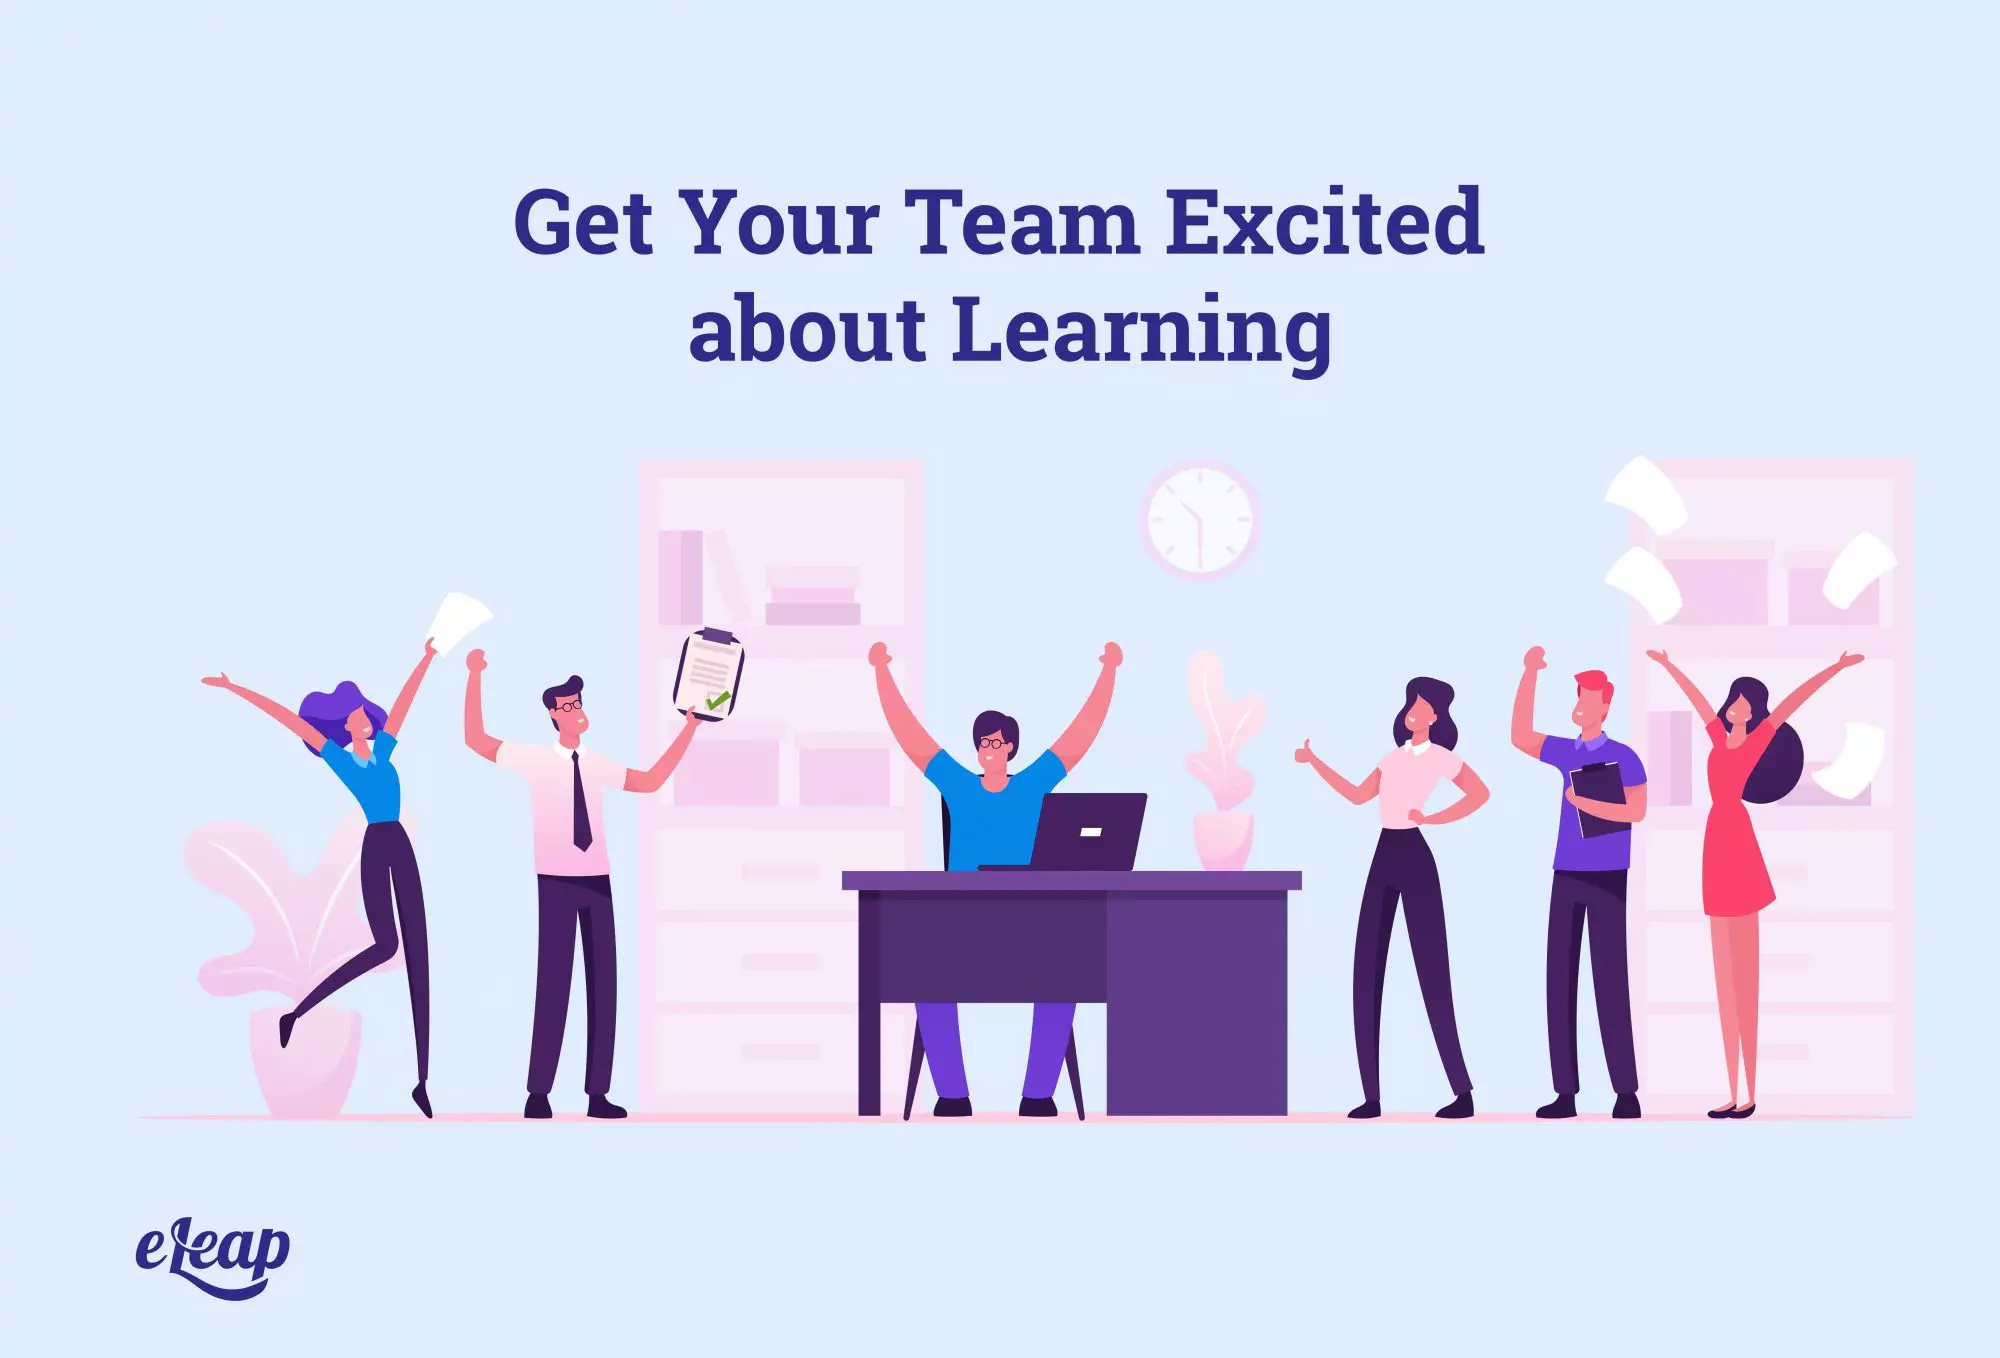 Get Your Team Excited about Learning